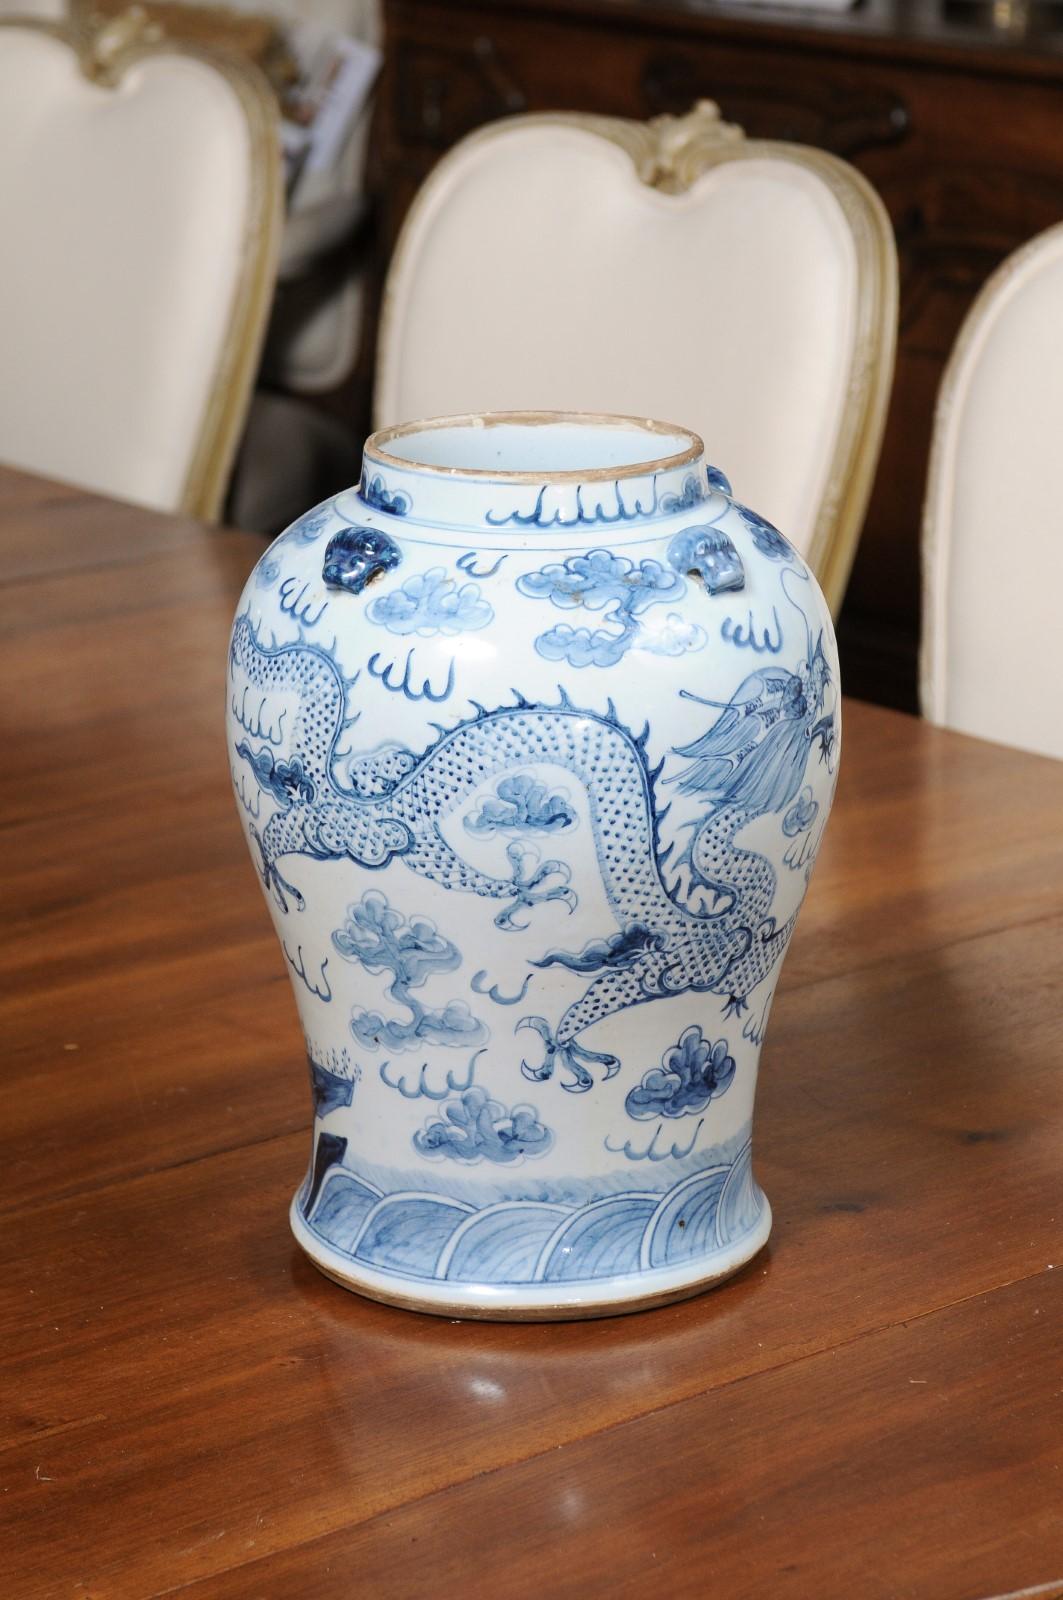 A Chinese Export blue and white porcelain vase from the 20th century, with dragon motifs. Created in China during the 20th century, this blue and white porcelain vase features a nicely curving body adorned with dragon motifs surrounded by clouds,